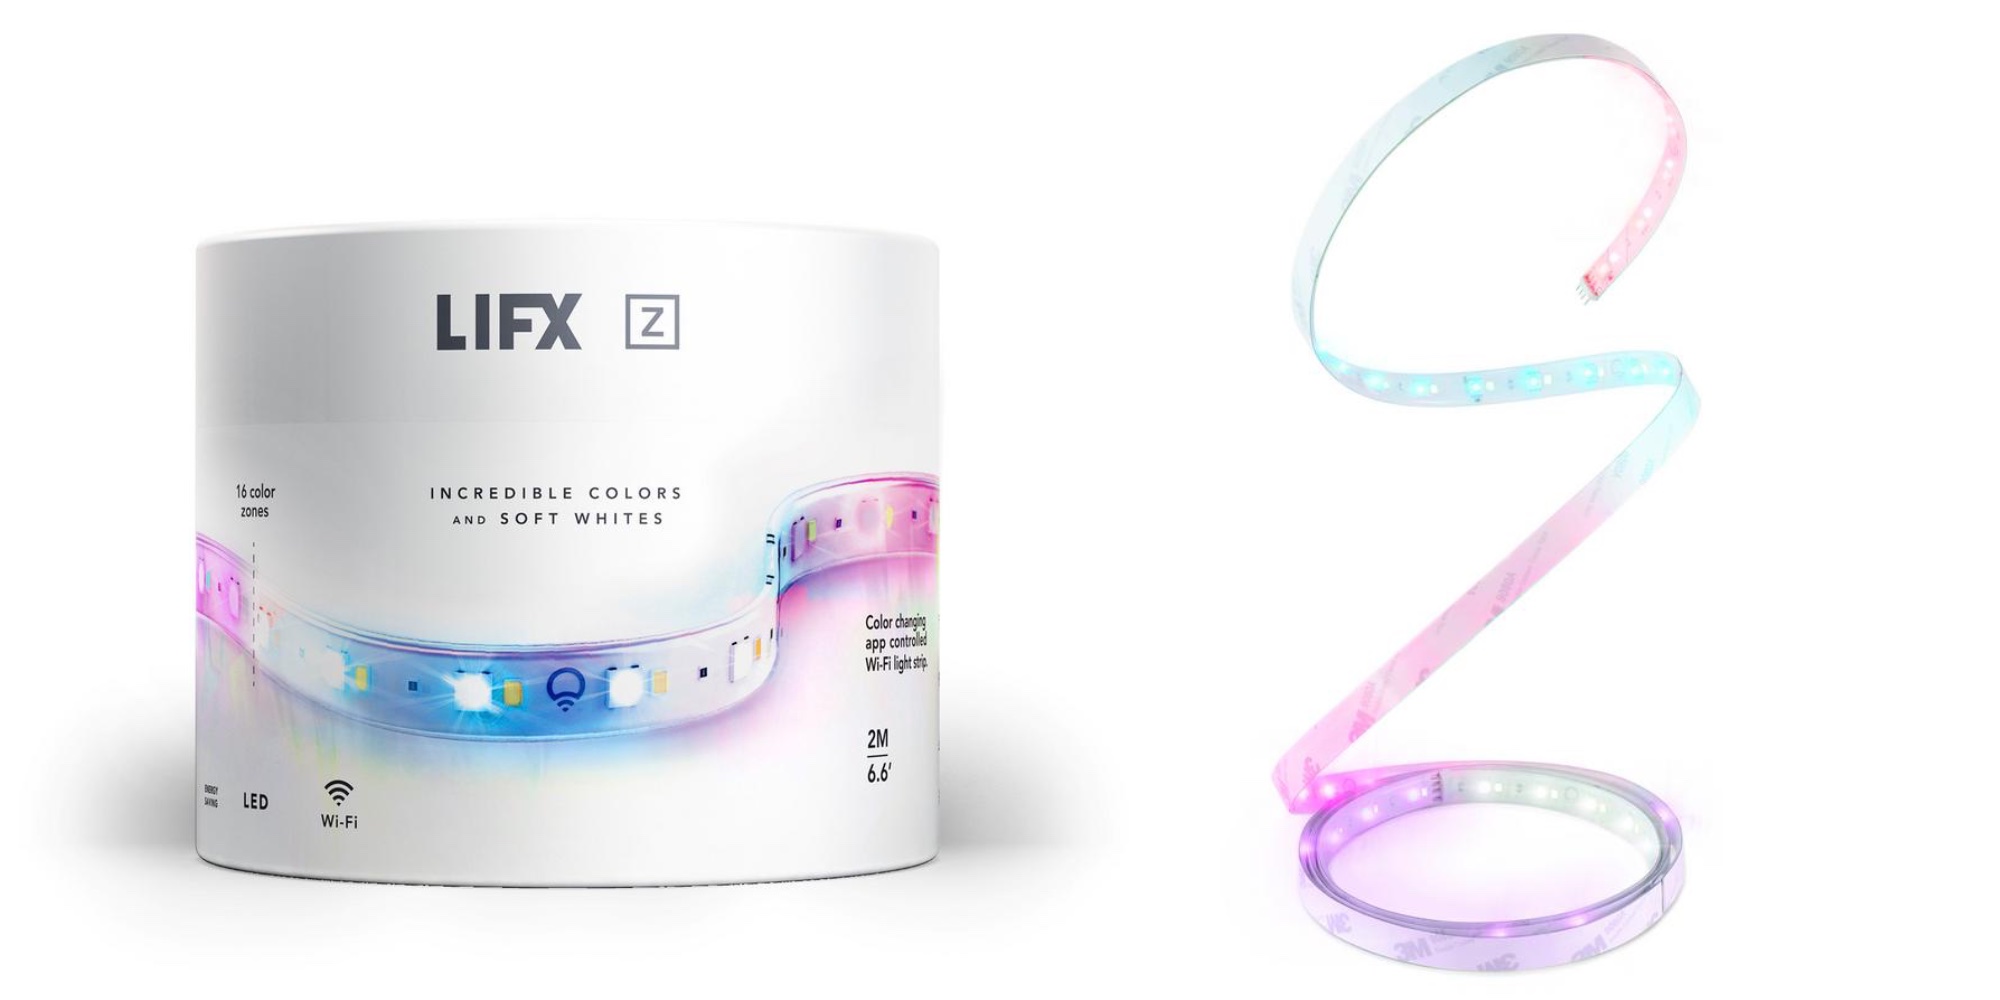 LIFX Z HomeKit Lightstrip adds ambiance to space for $70 ($15 off), more